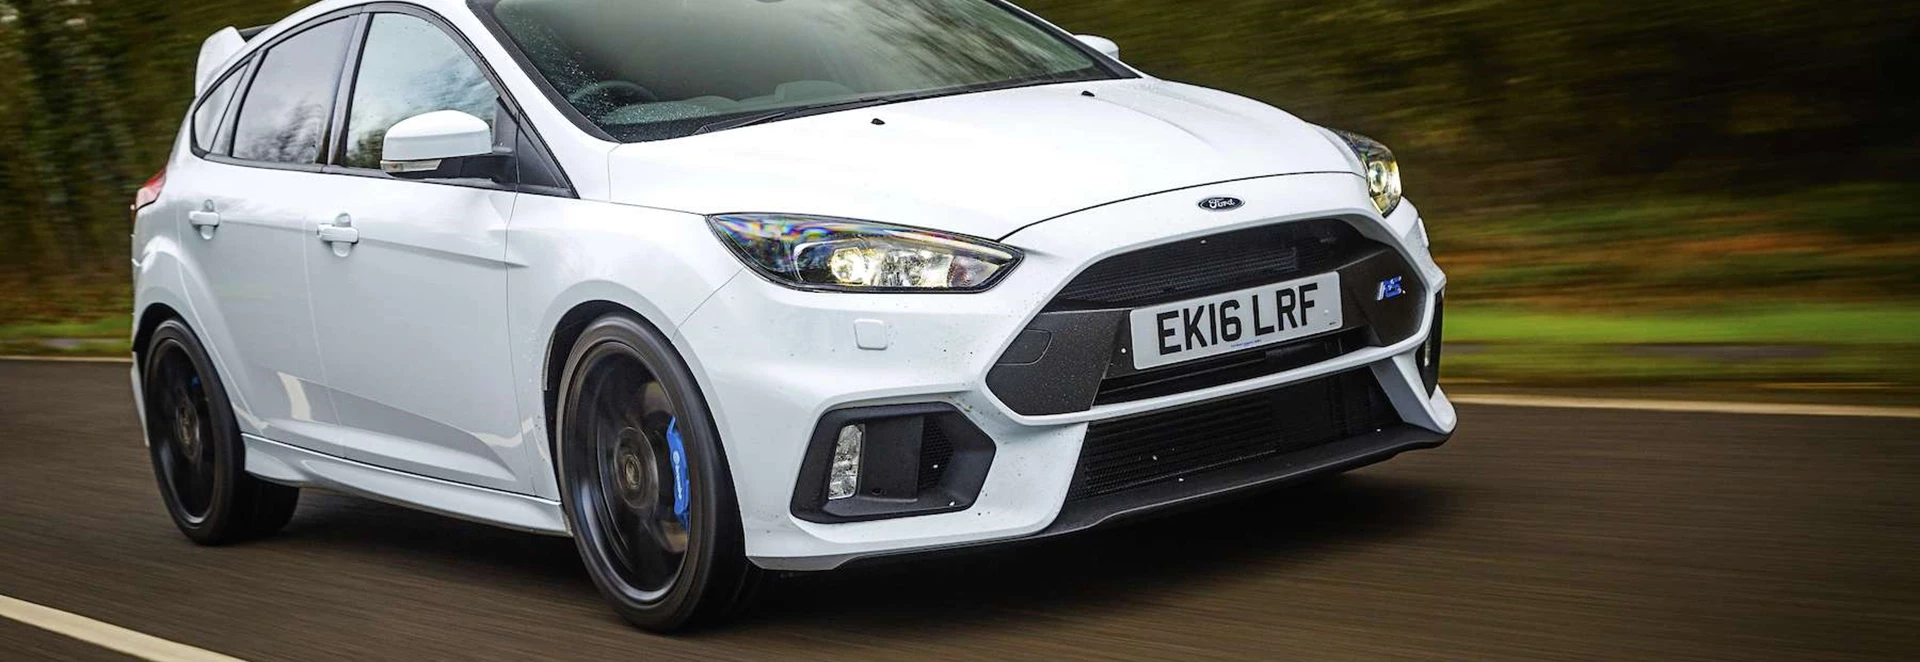 No New Focus Rs Is On The Way Says Ford Car Keys